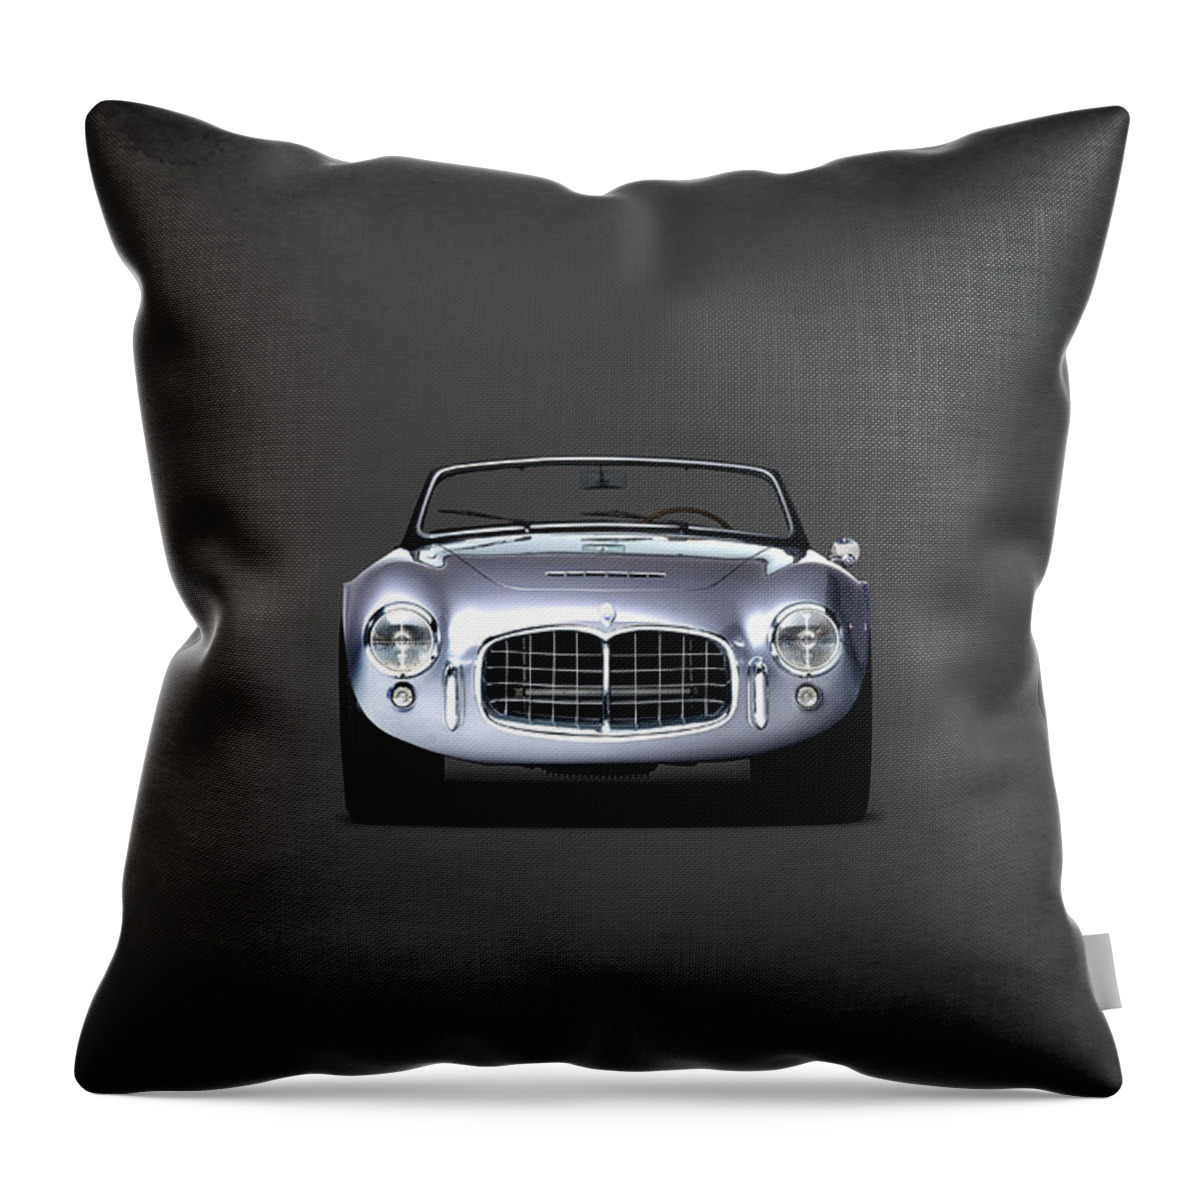 Maserati Throw Pillow featuring the photograph Maserati A6 Spider by Mark Rogan